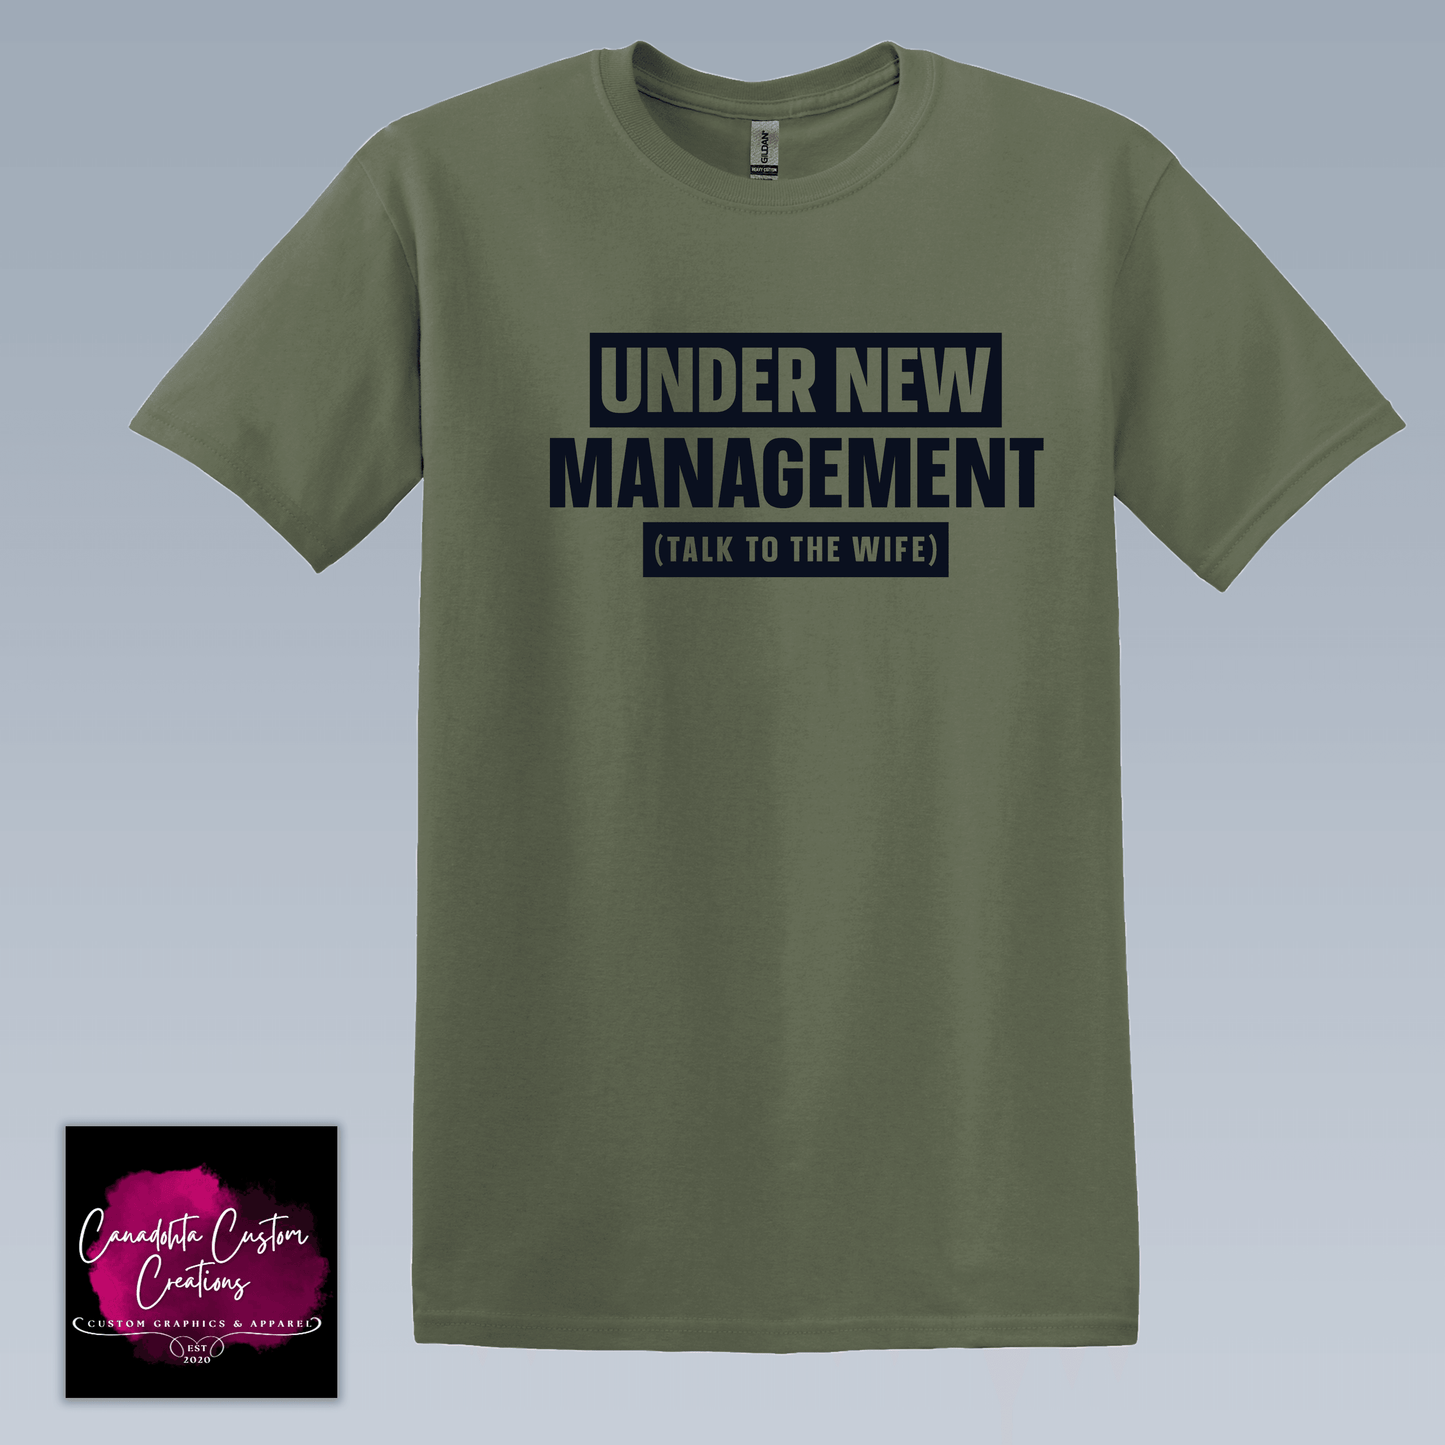 Under New Management, Talk to the Wife, funny Men's Tshirt, gift for the new husband - Canadohta Custom Creations LLC